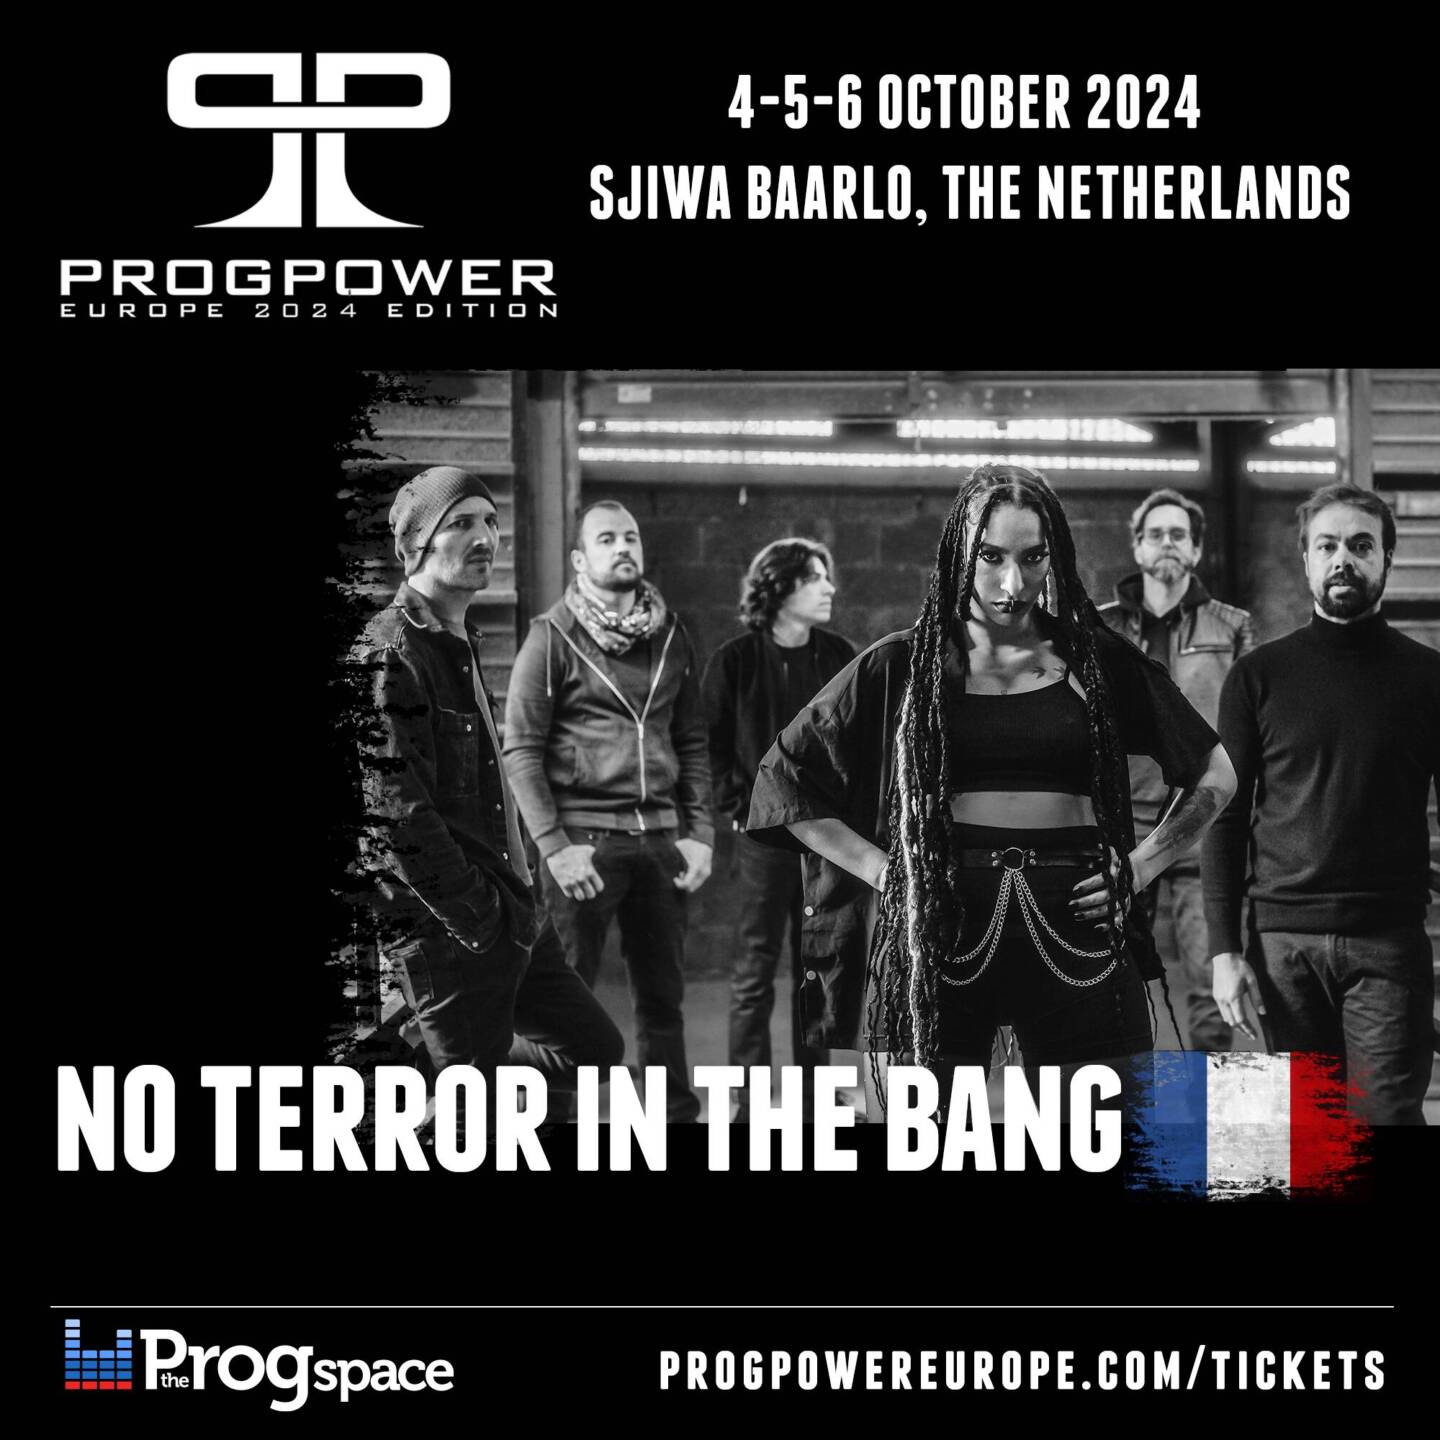 No Terror In The Bang is the third band confirmed for ProgPower Europe 2024!